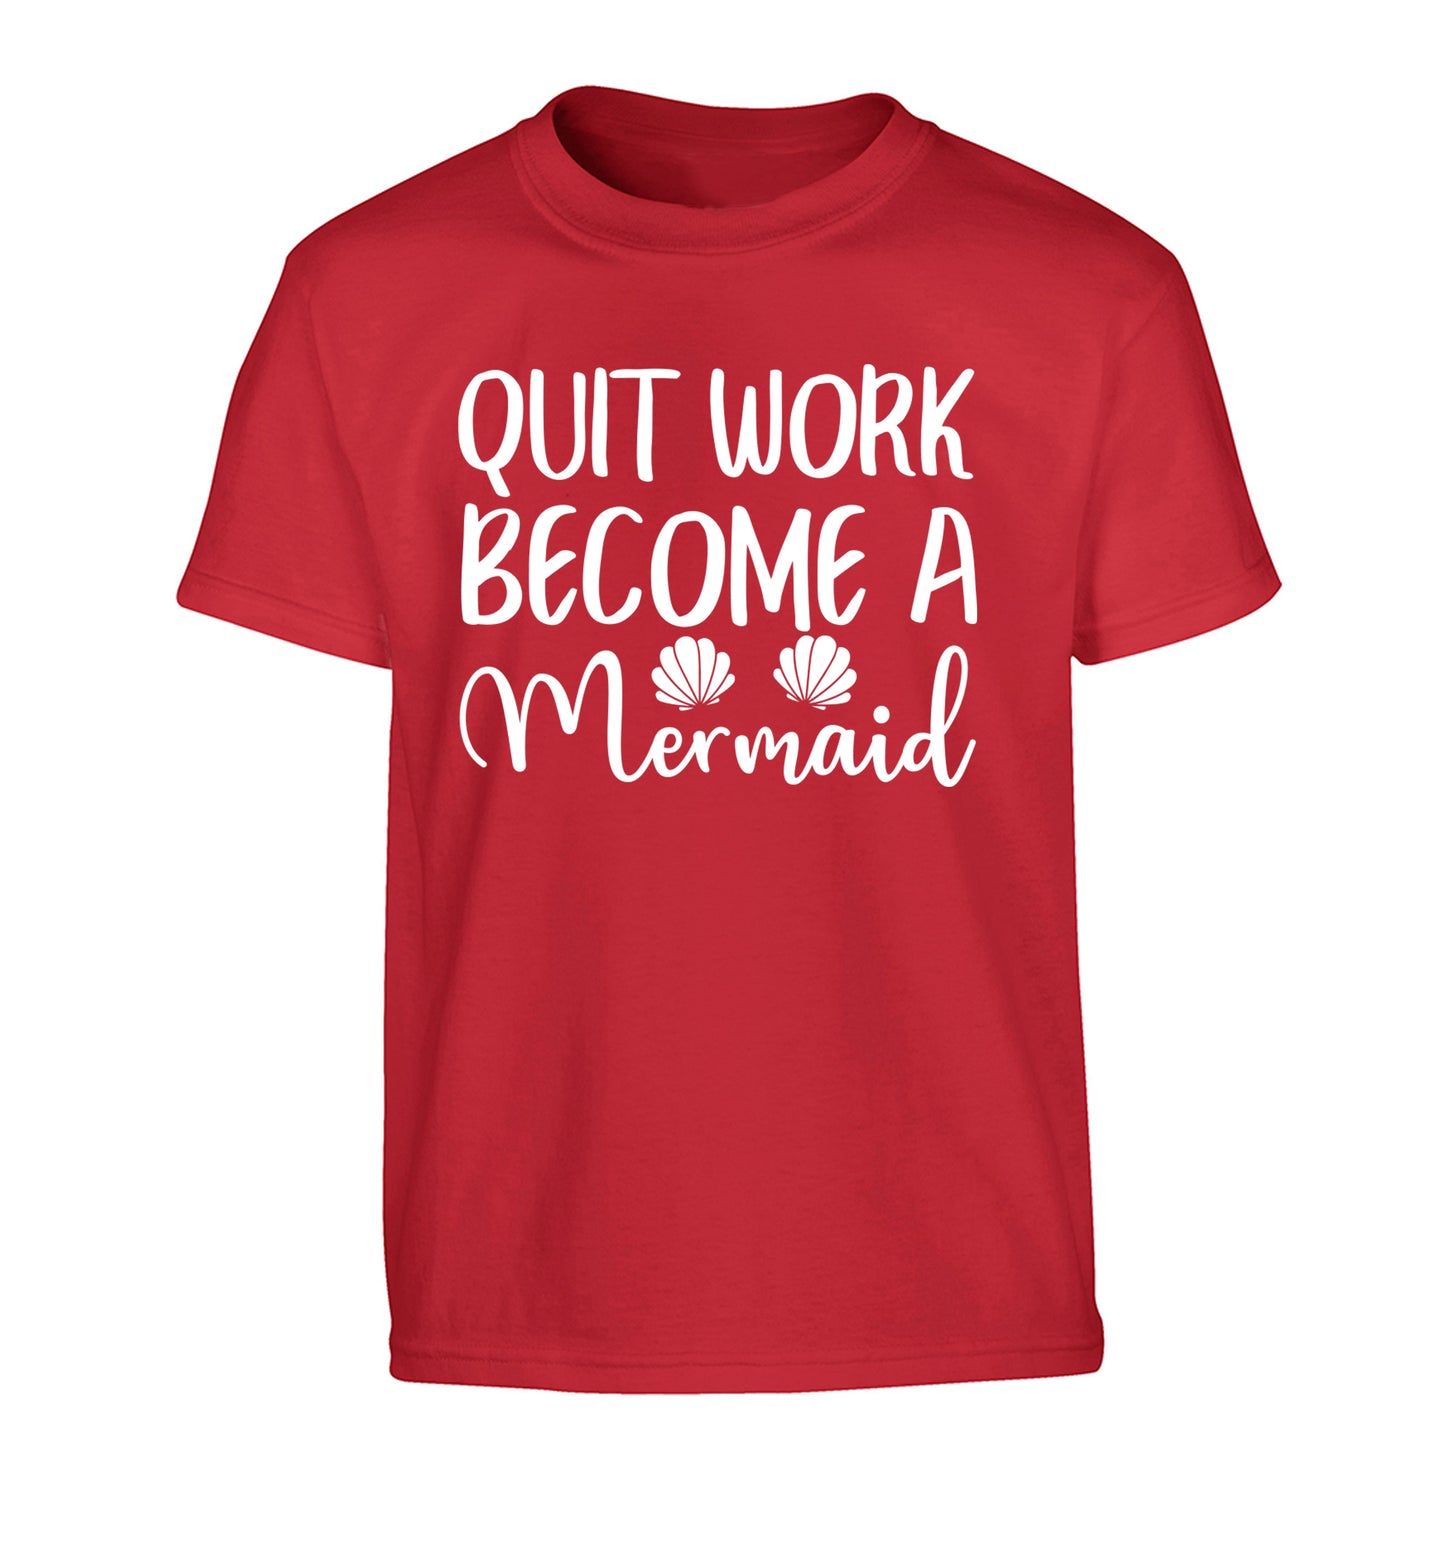 Quit work become a mermaid Children's red Tshirt 12-13 Years